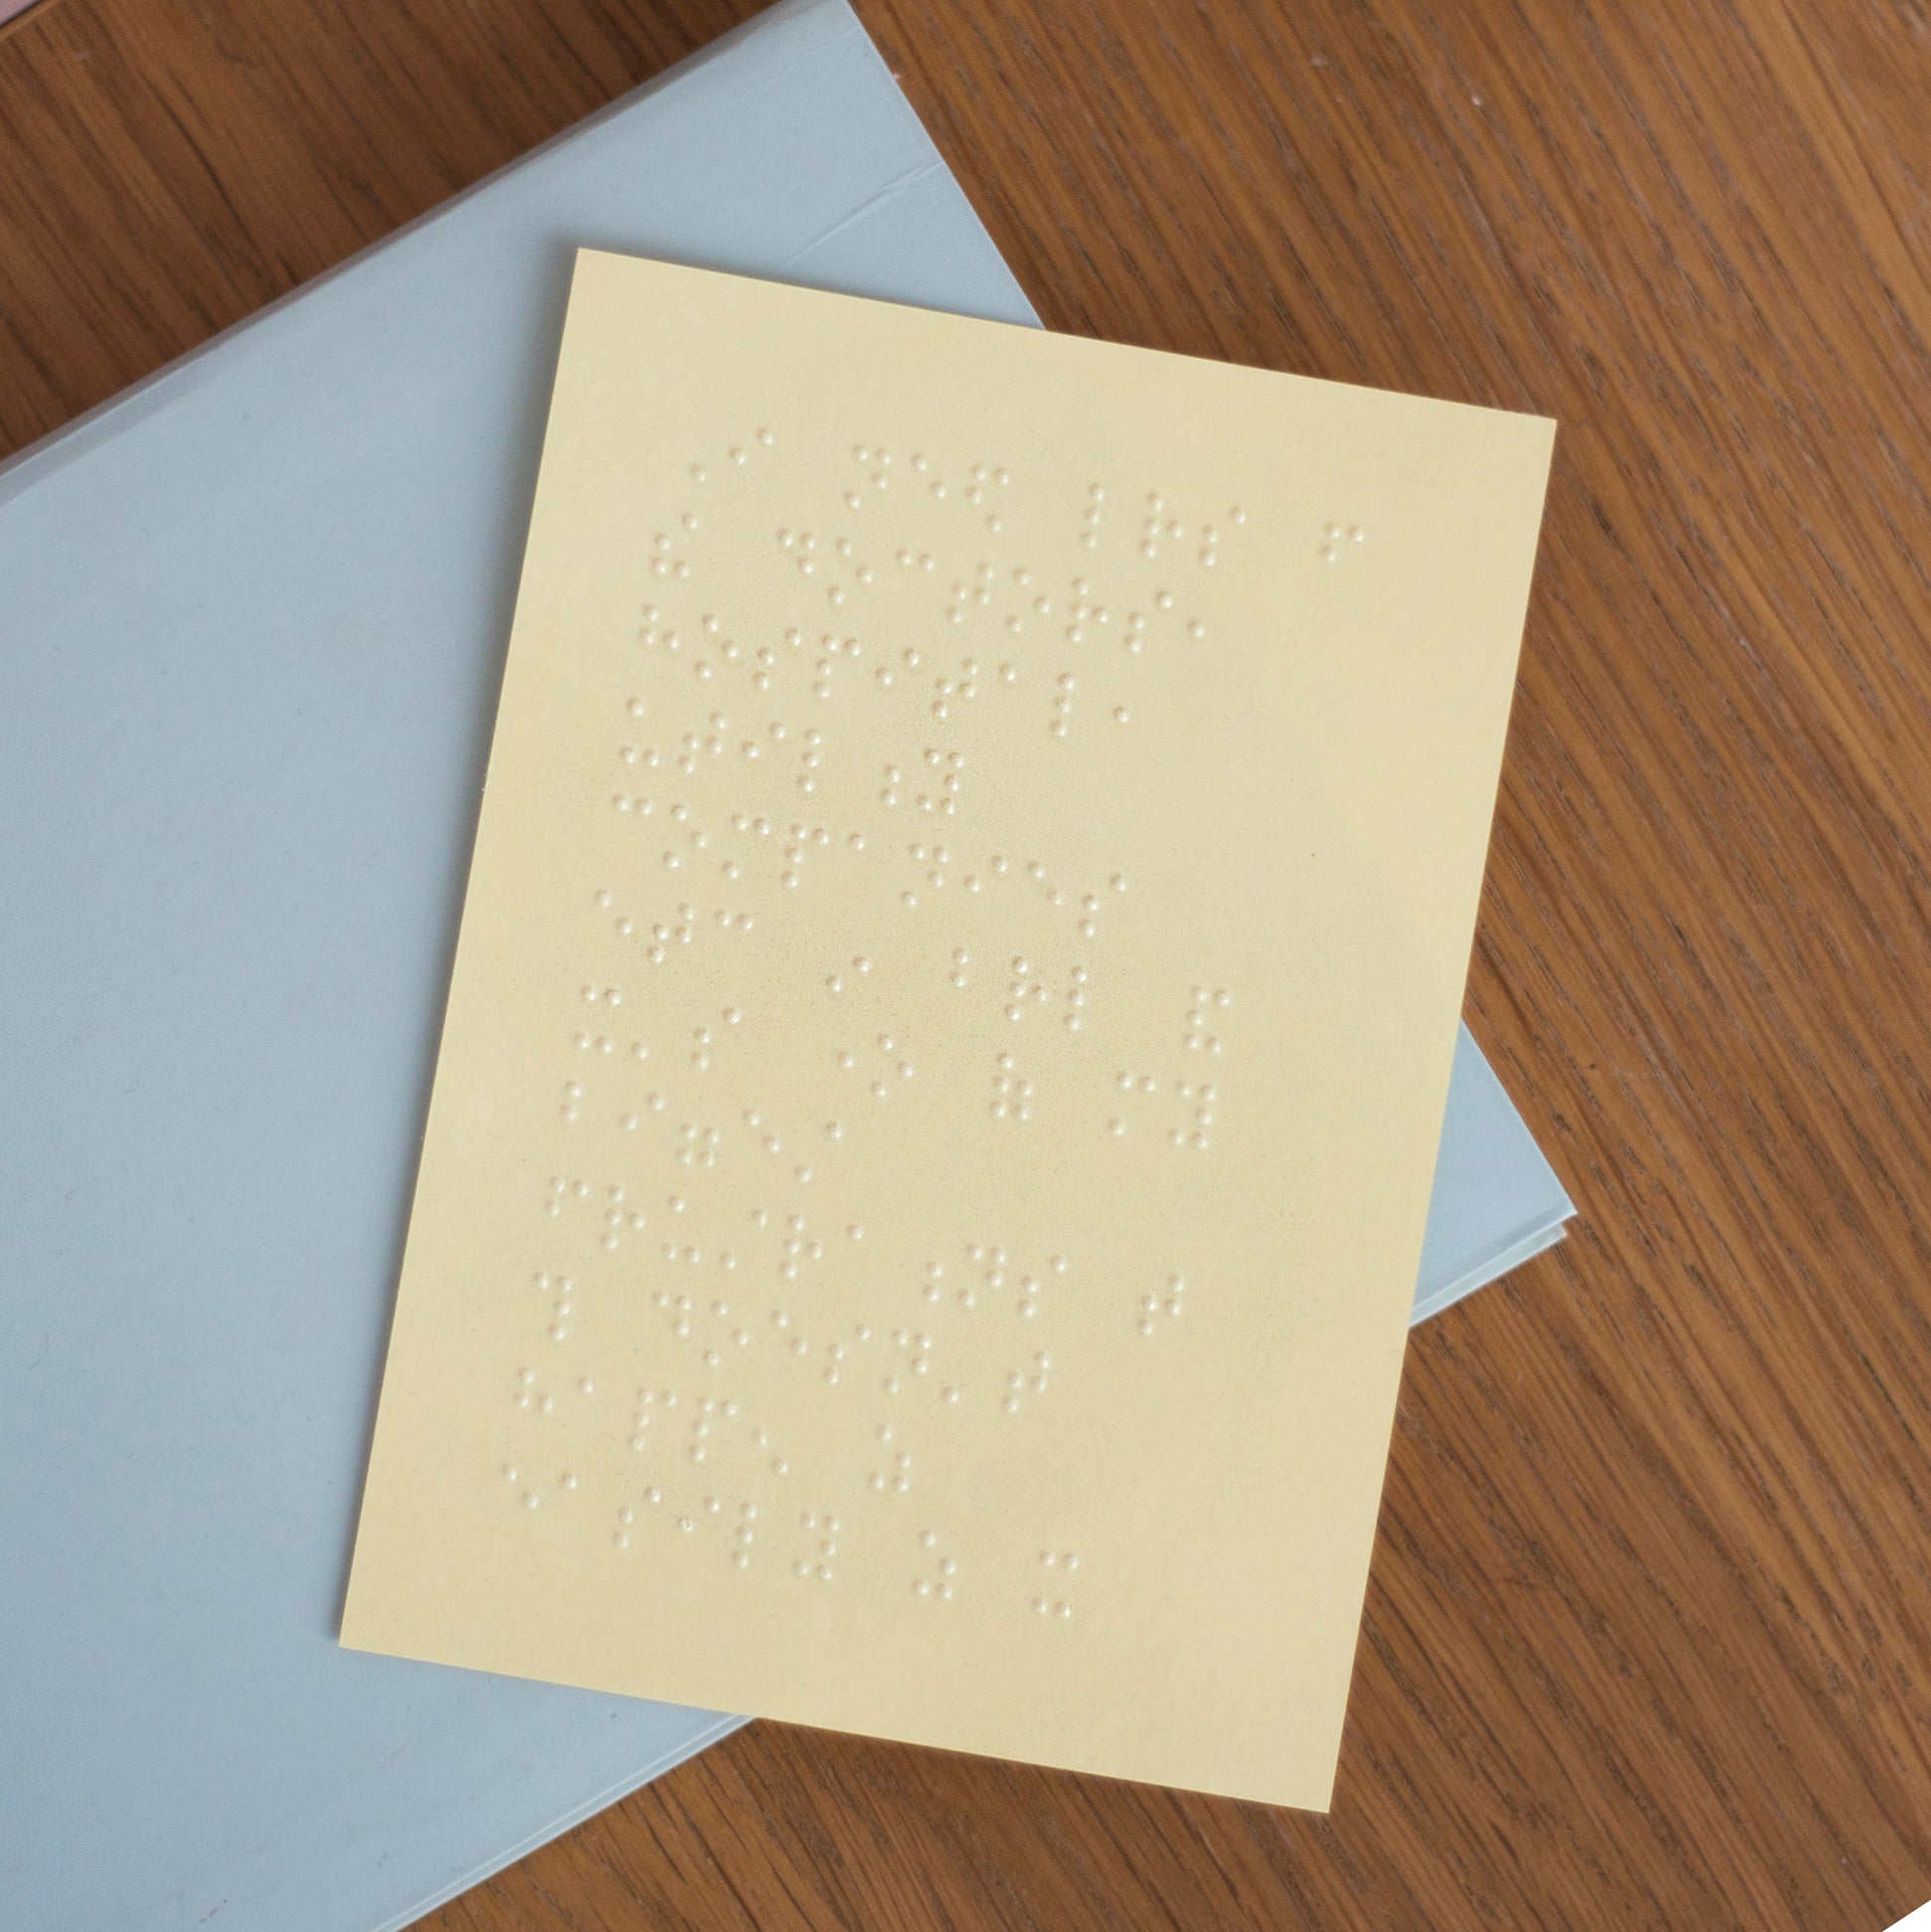 An A6 sheet of braille, the clear adhesive is on yellow backing paper. The sticker is sat on a blue card folder.